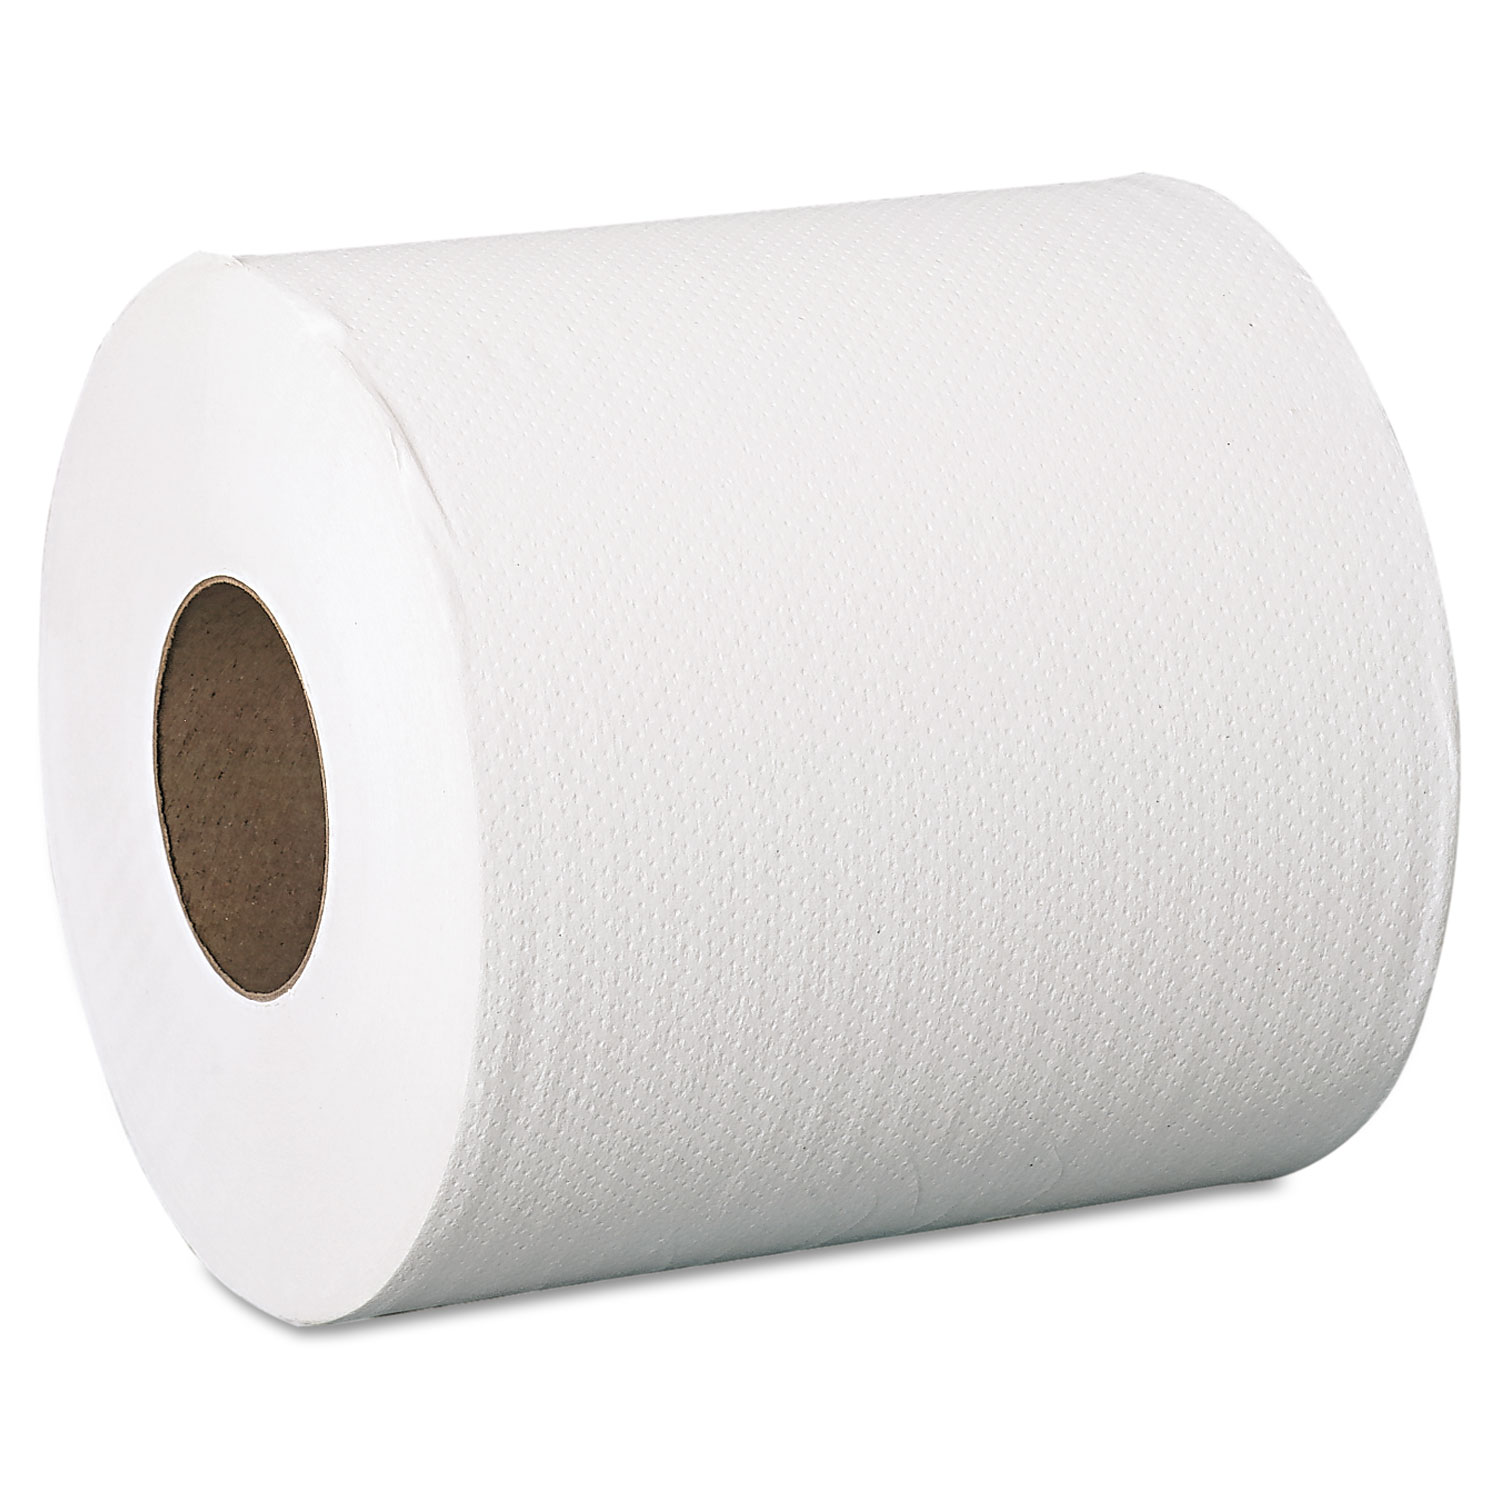 2-Ply Center-Pull Perforated Wipers, 8 1/4 x 12, 520/Roll, 6 Rolls/Carton